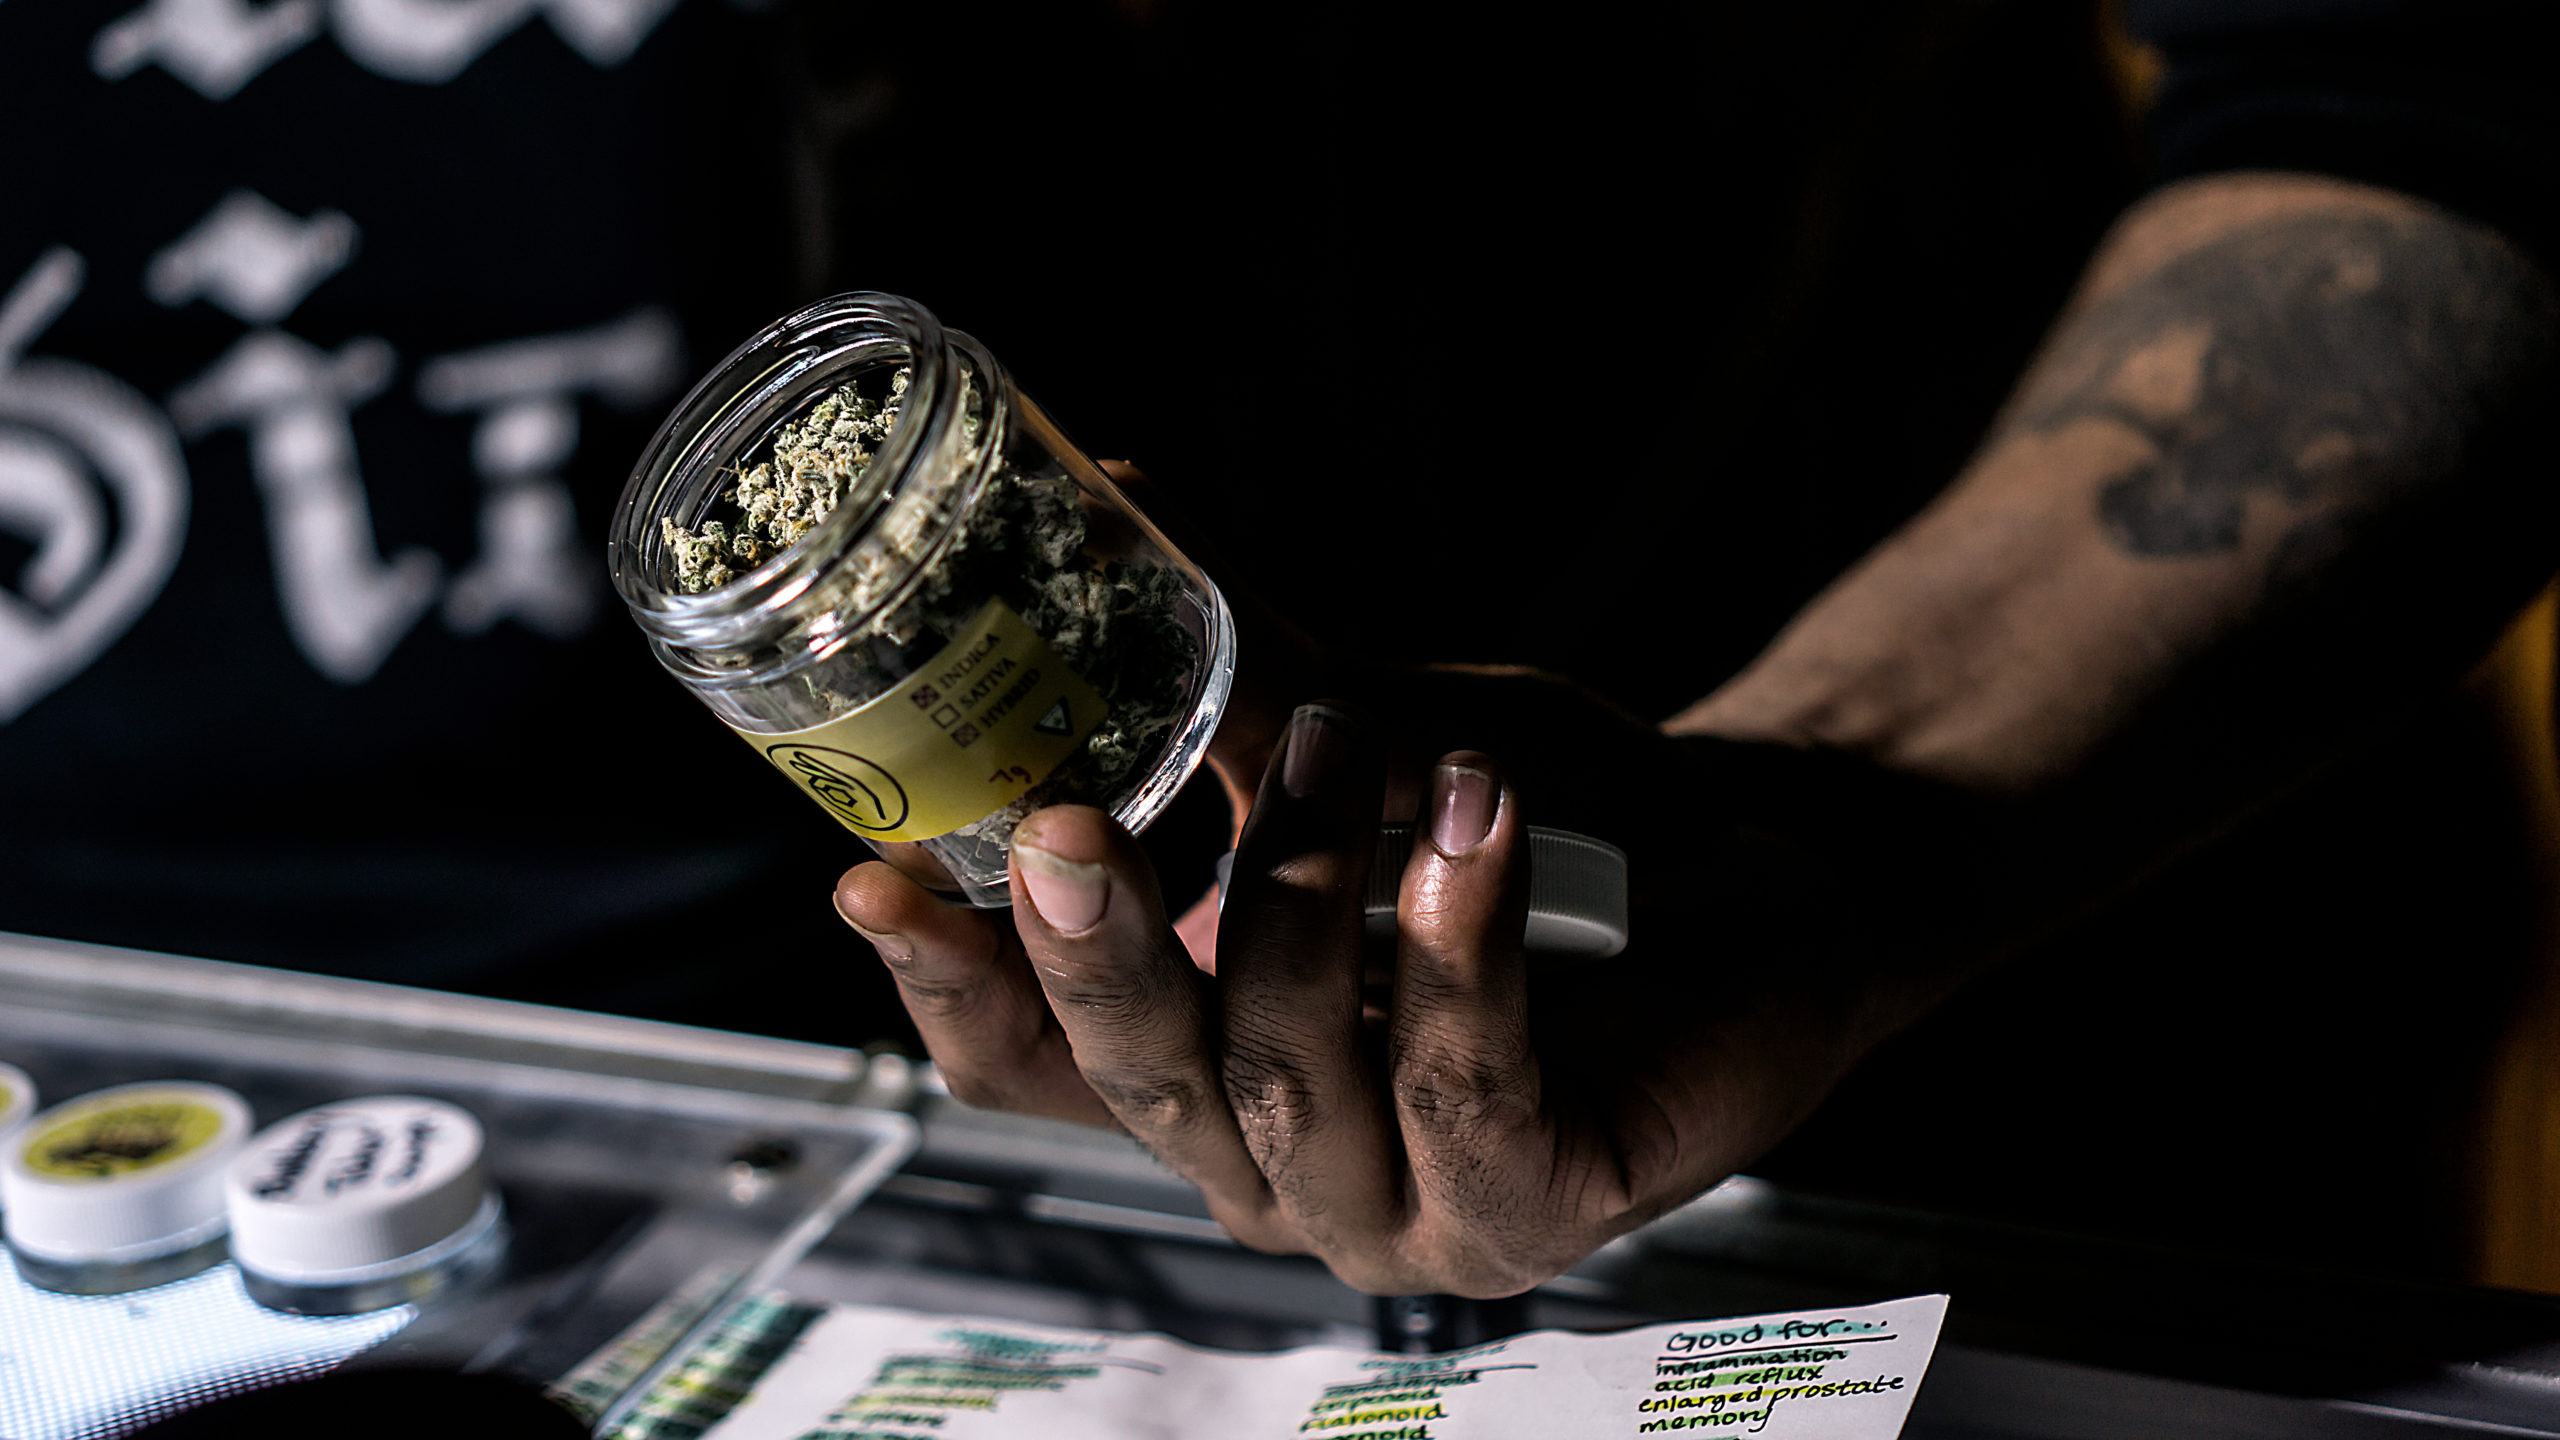 You are currently viewing The Best Black-Owned CBD and Cannabis Companies.